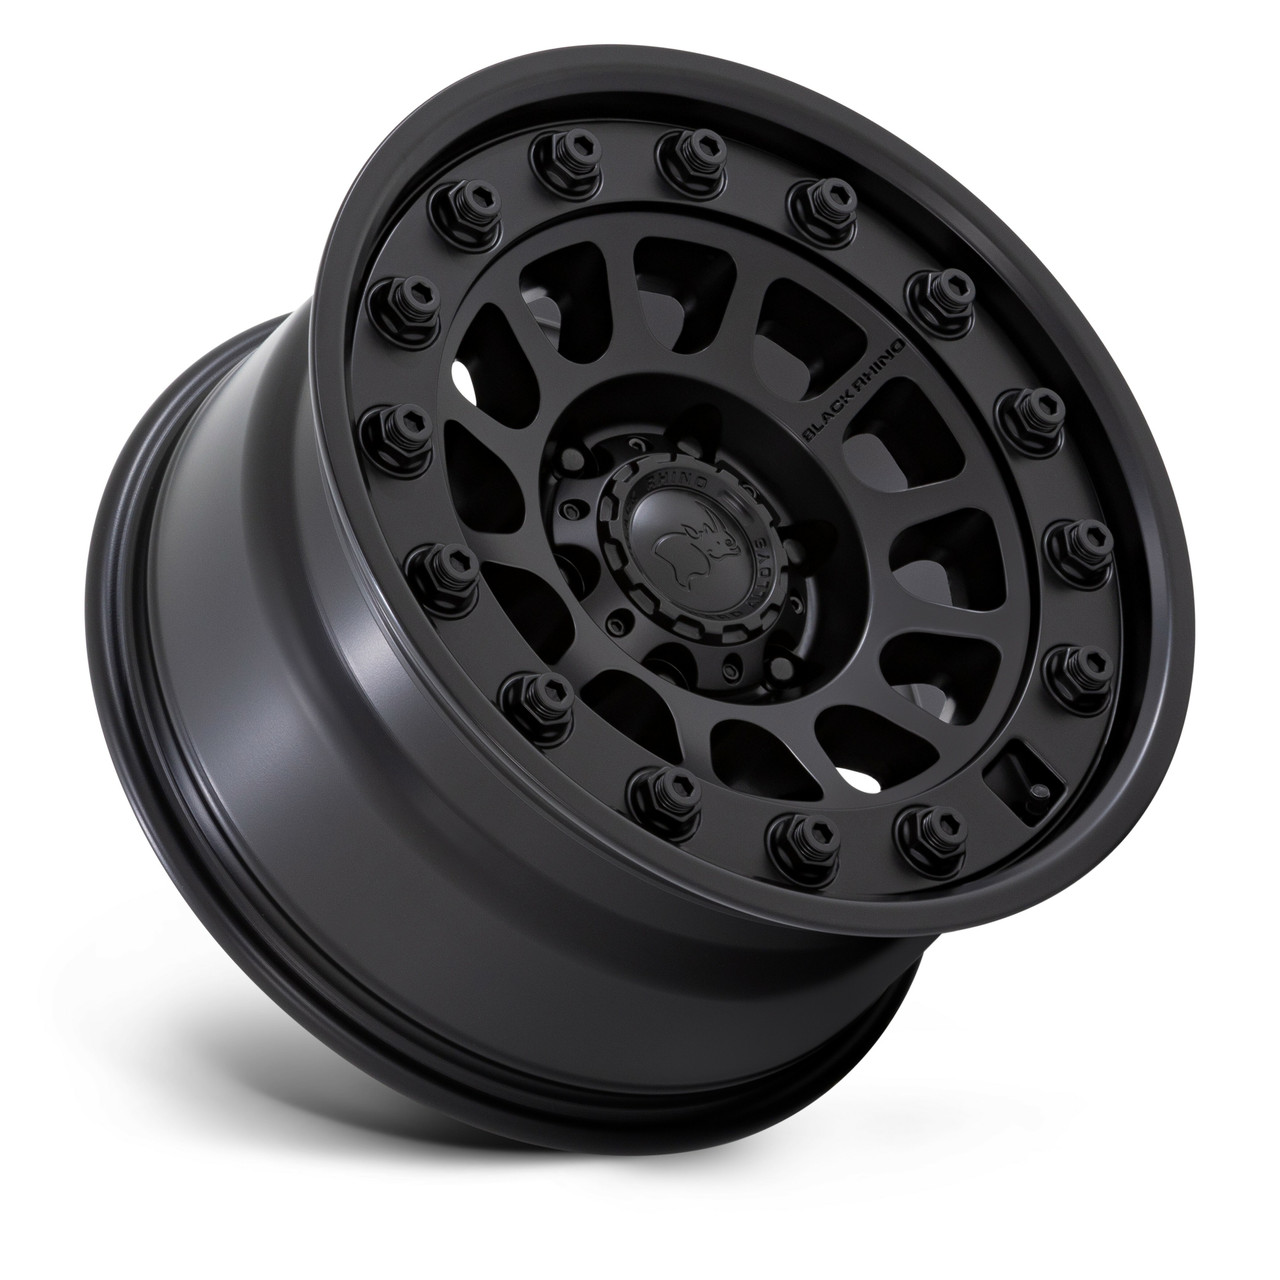 Black Rhino BR012 Outback 17x8.5 Matte Black Wheel 5x5 17" -10mm Lifted For Jeep